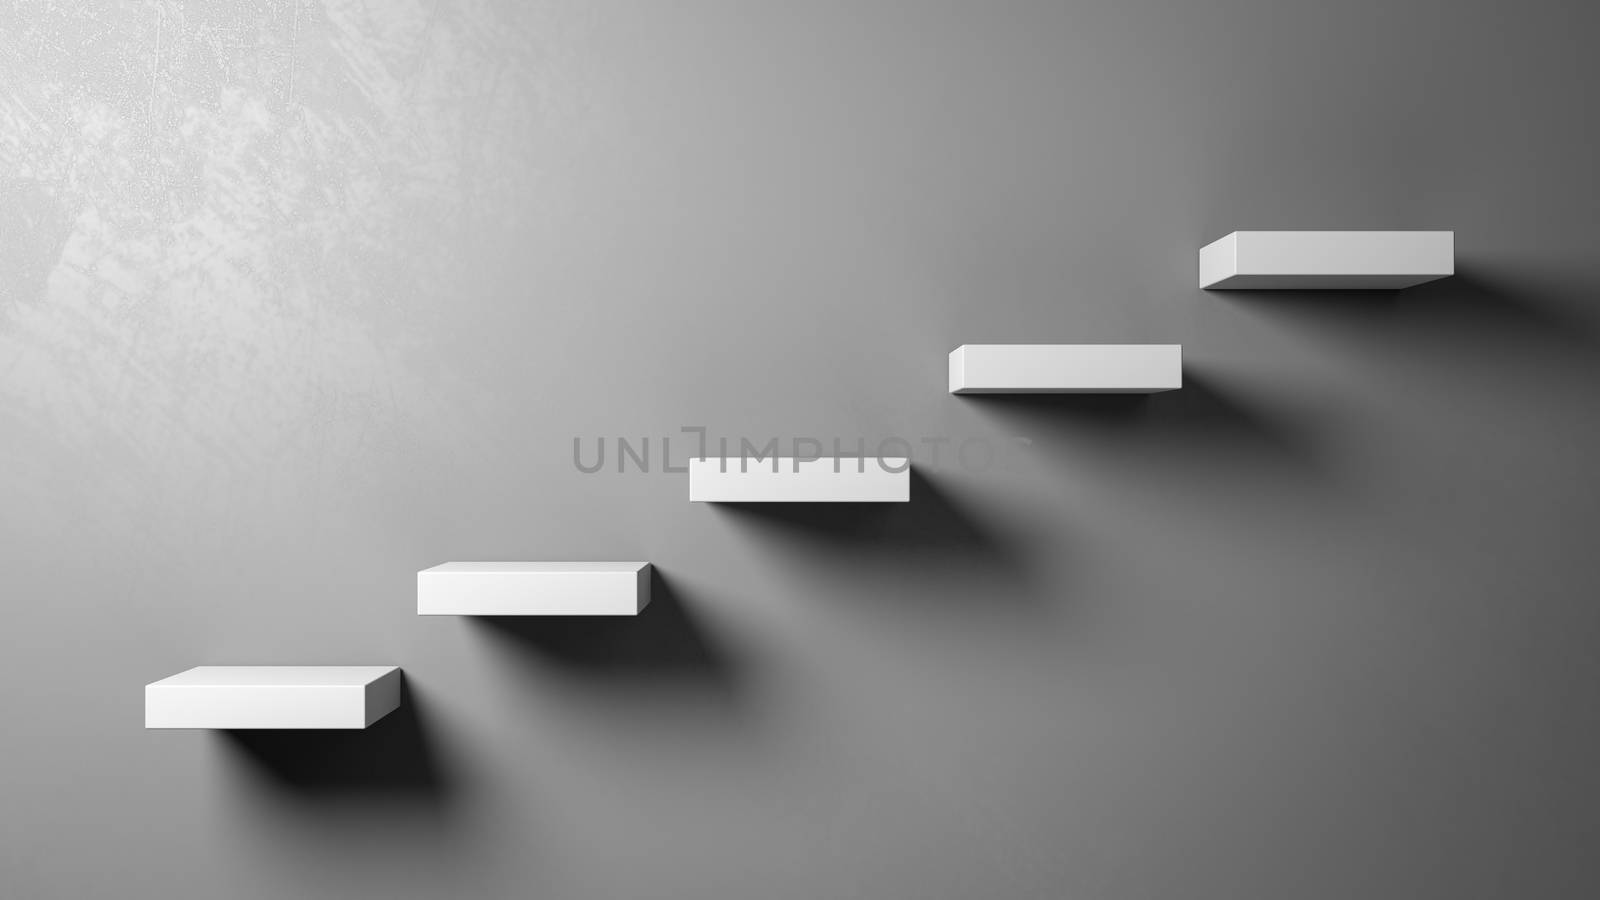 White Stairs Steps Against a Gray Wall with Copyspace 3D Illustration